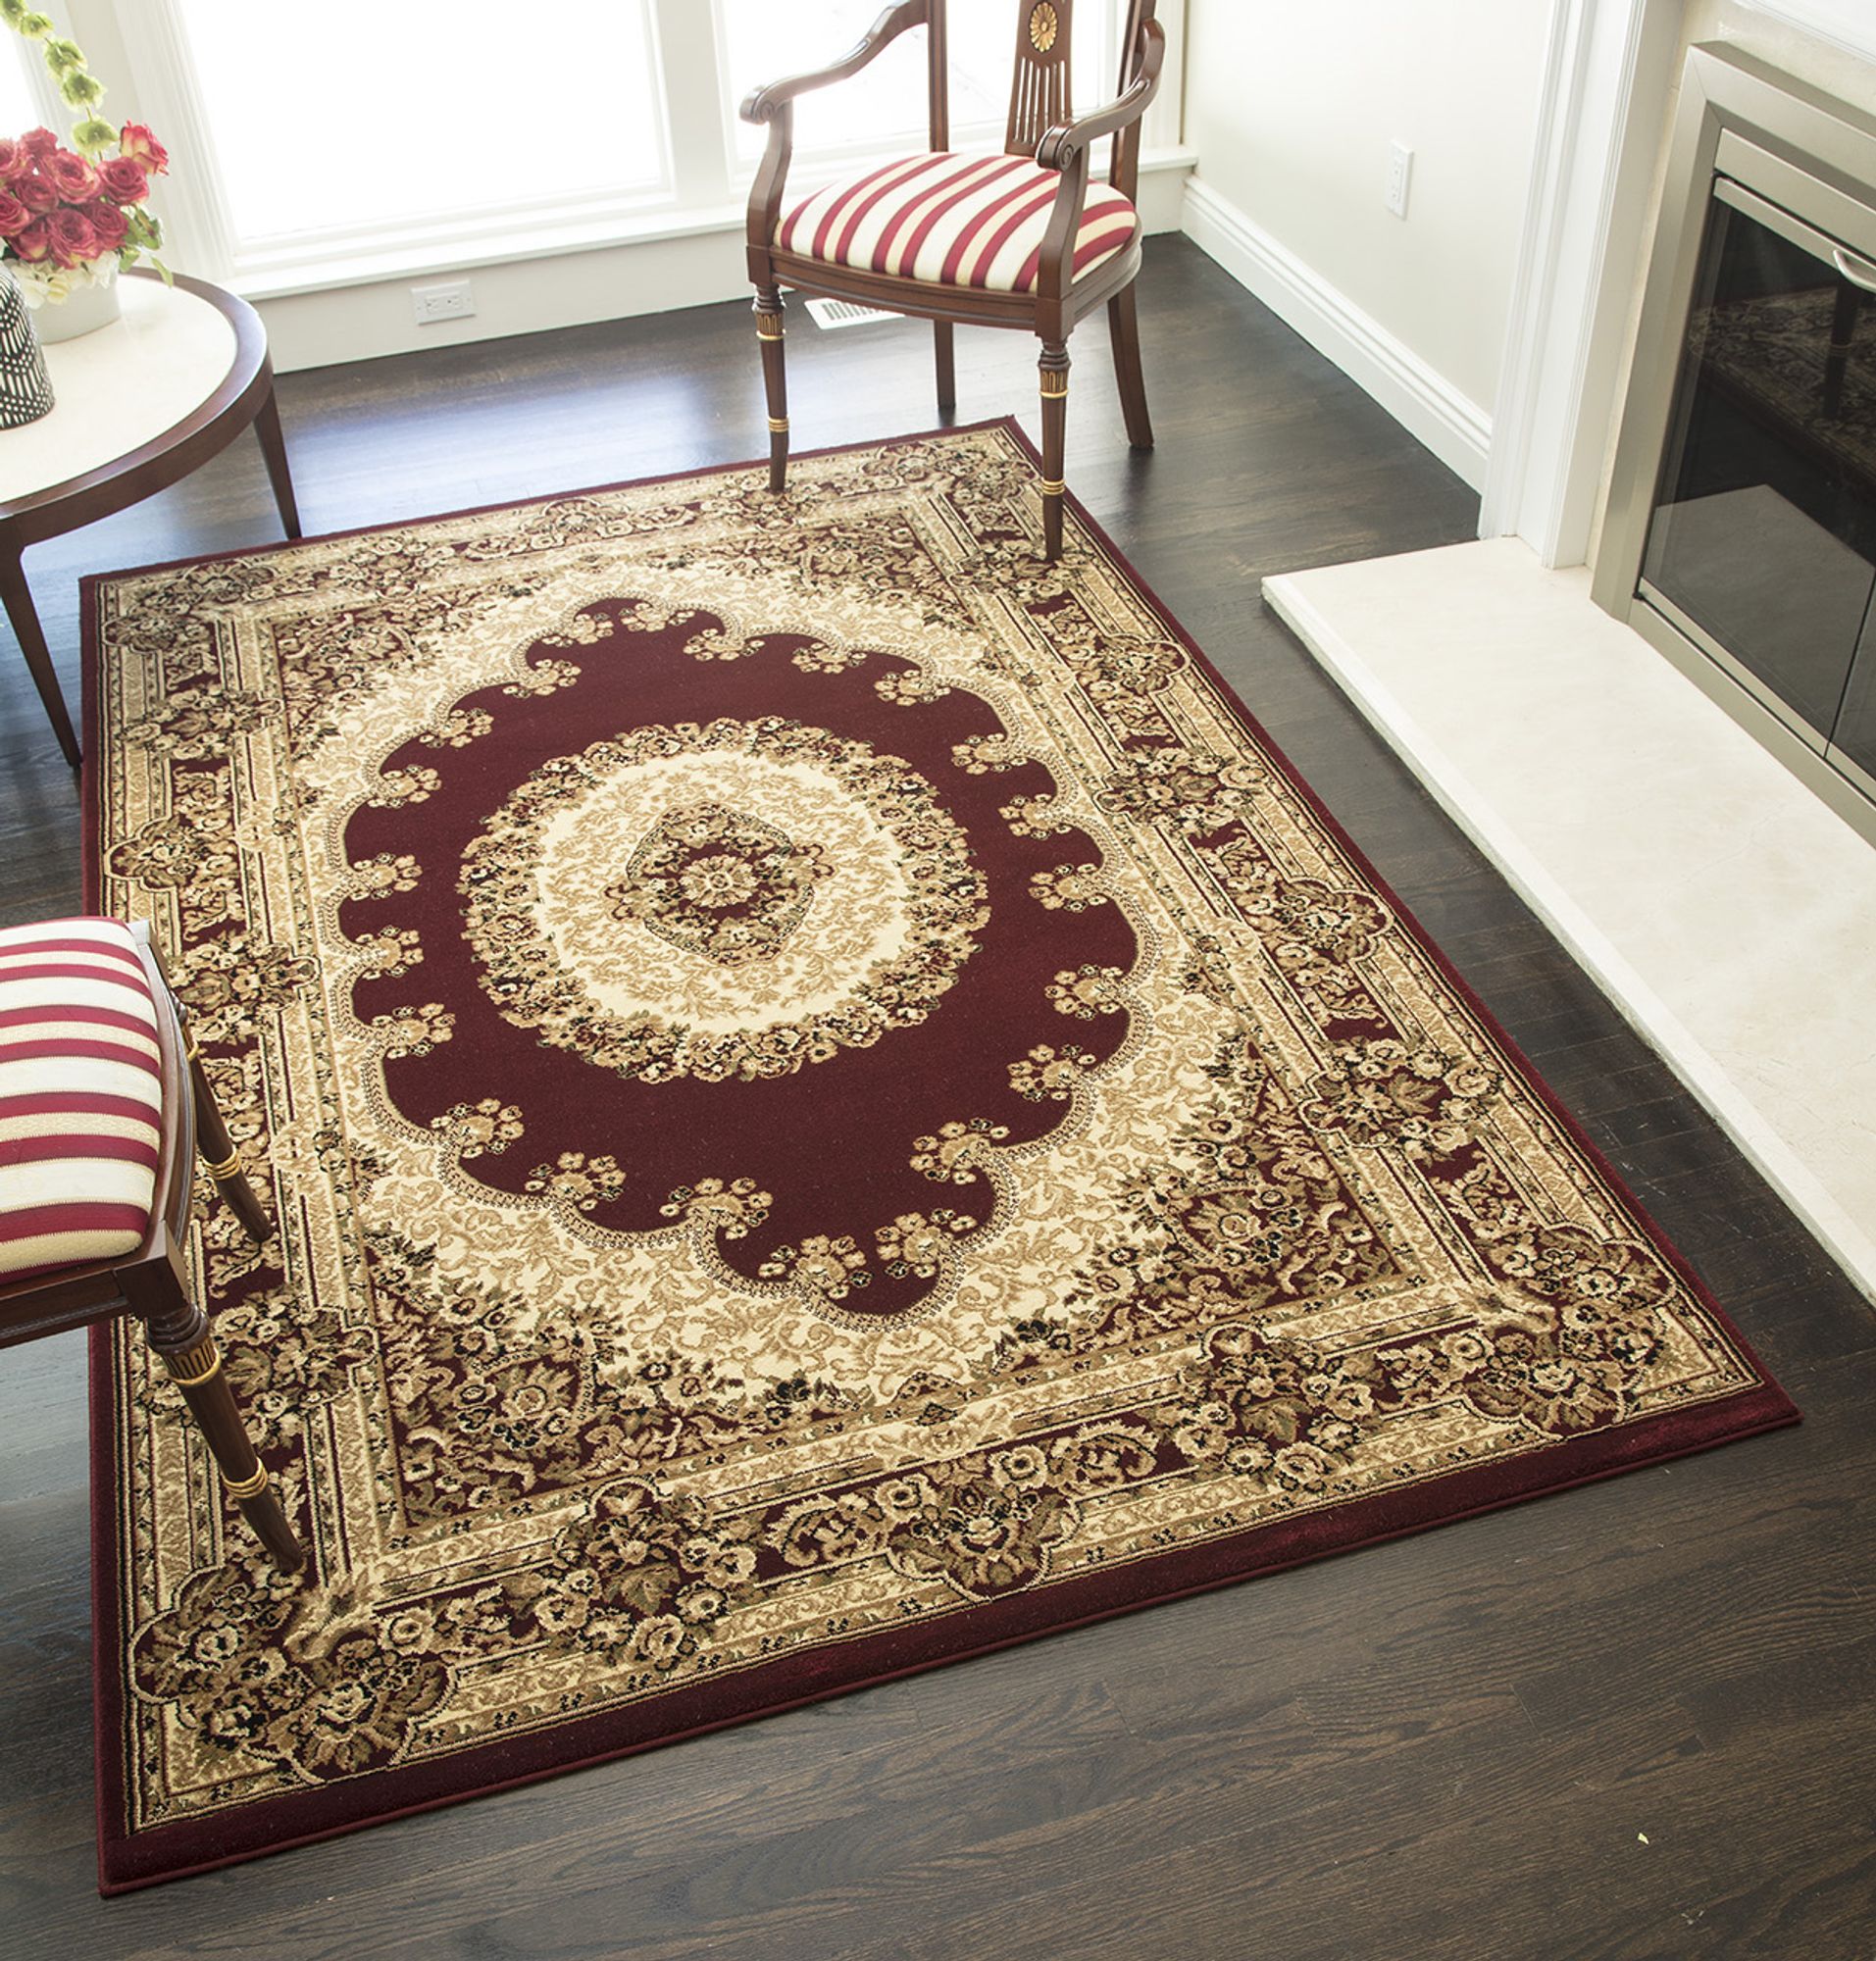 Rugs America Vista 807-RED Kerman Red Oriental Traditional Red Area Rug, 7'10"x10'10" - image 2 of 5